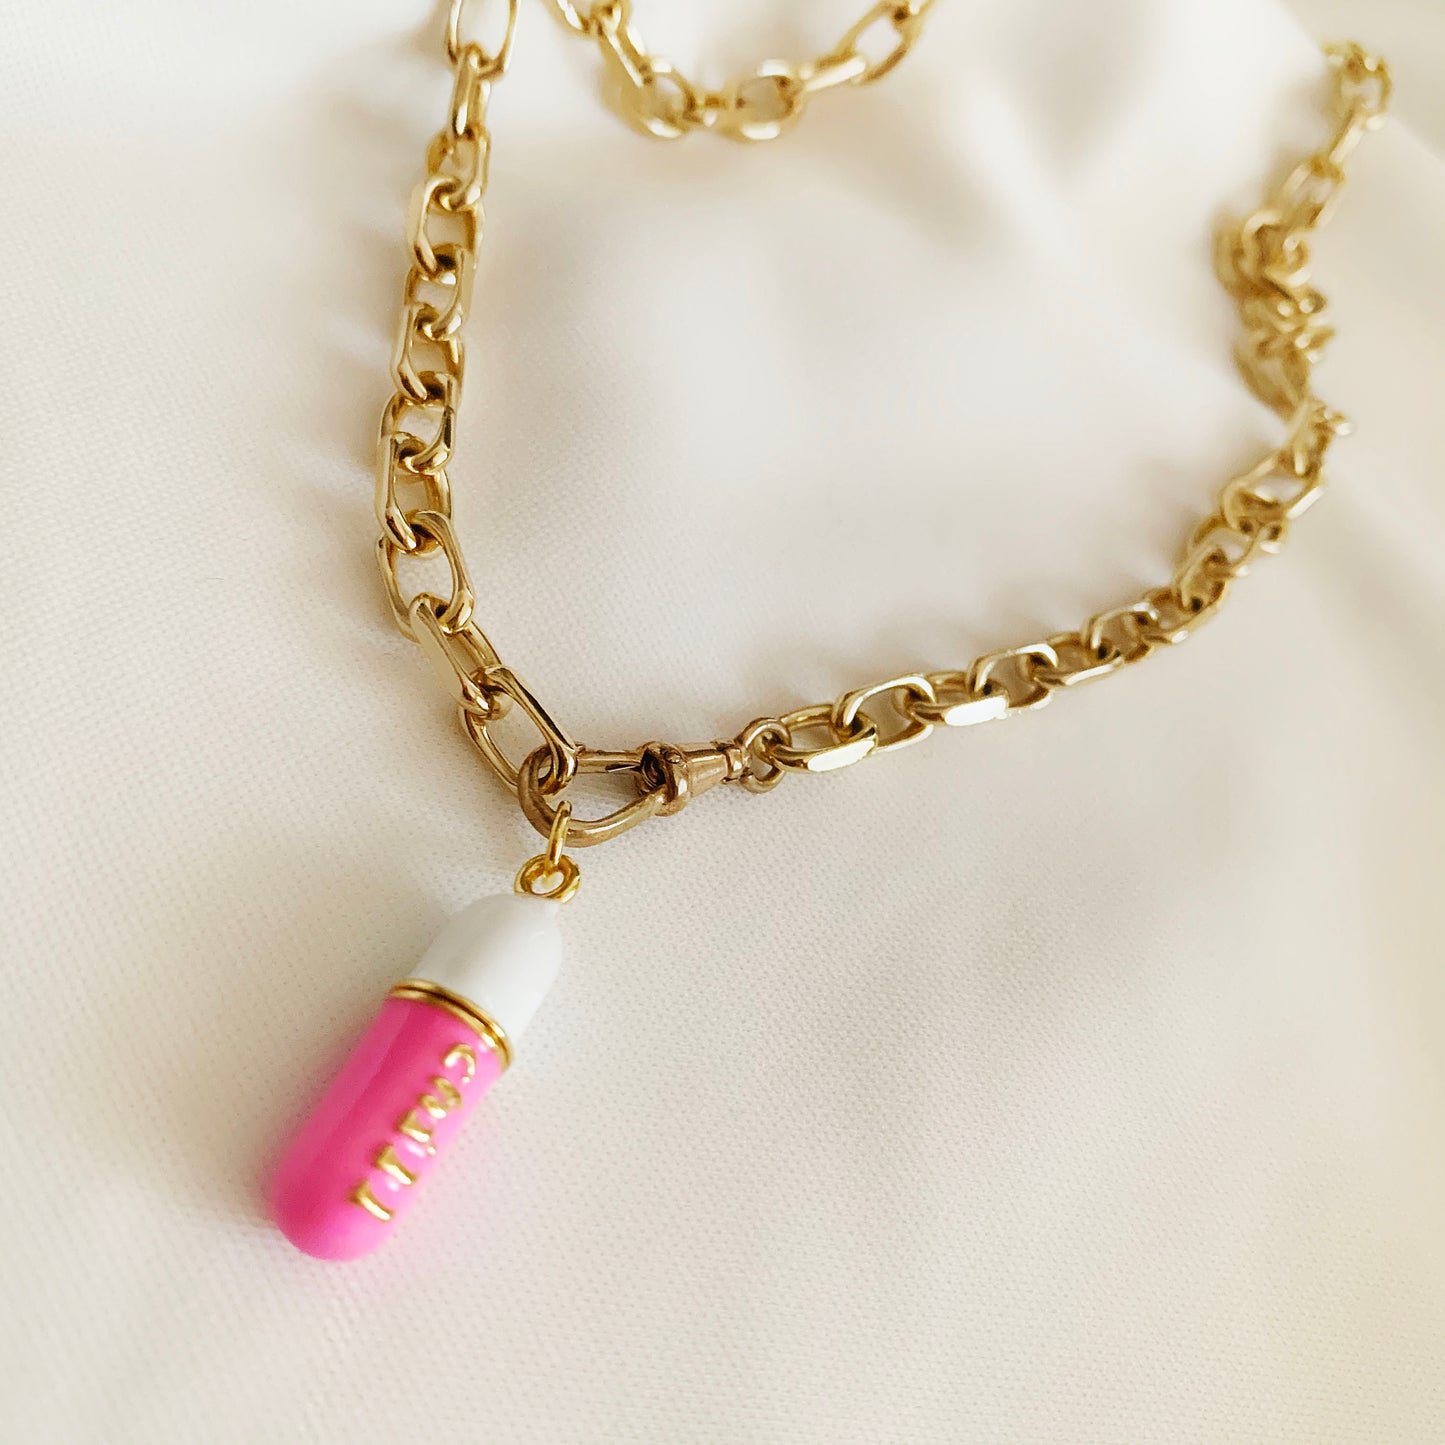 Chill / Love / Hope Pill - Necklace